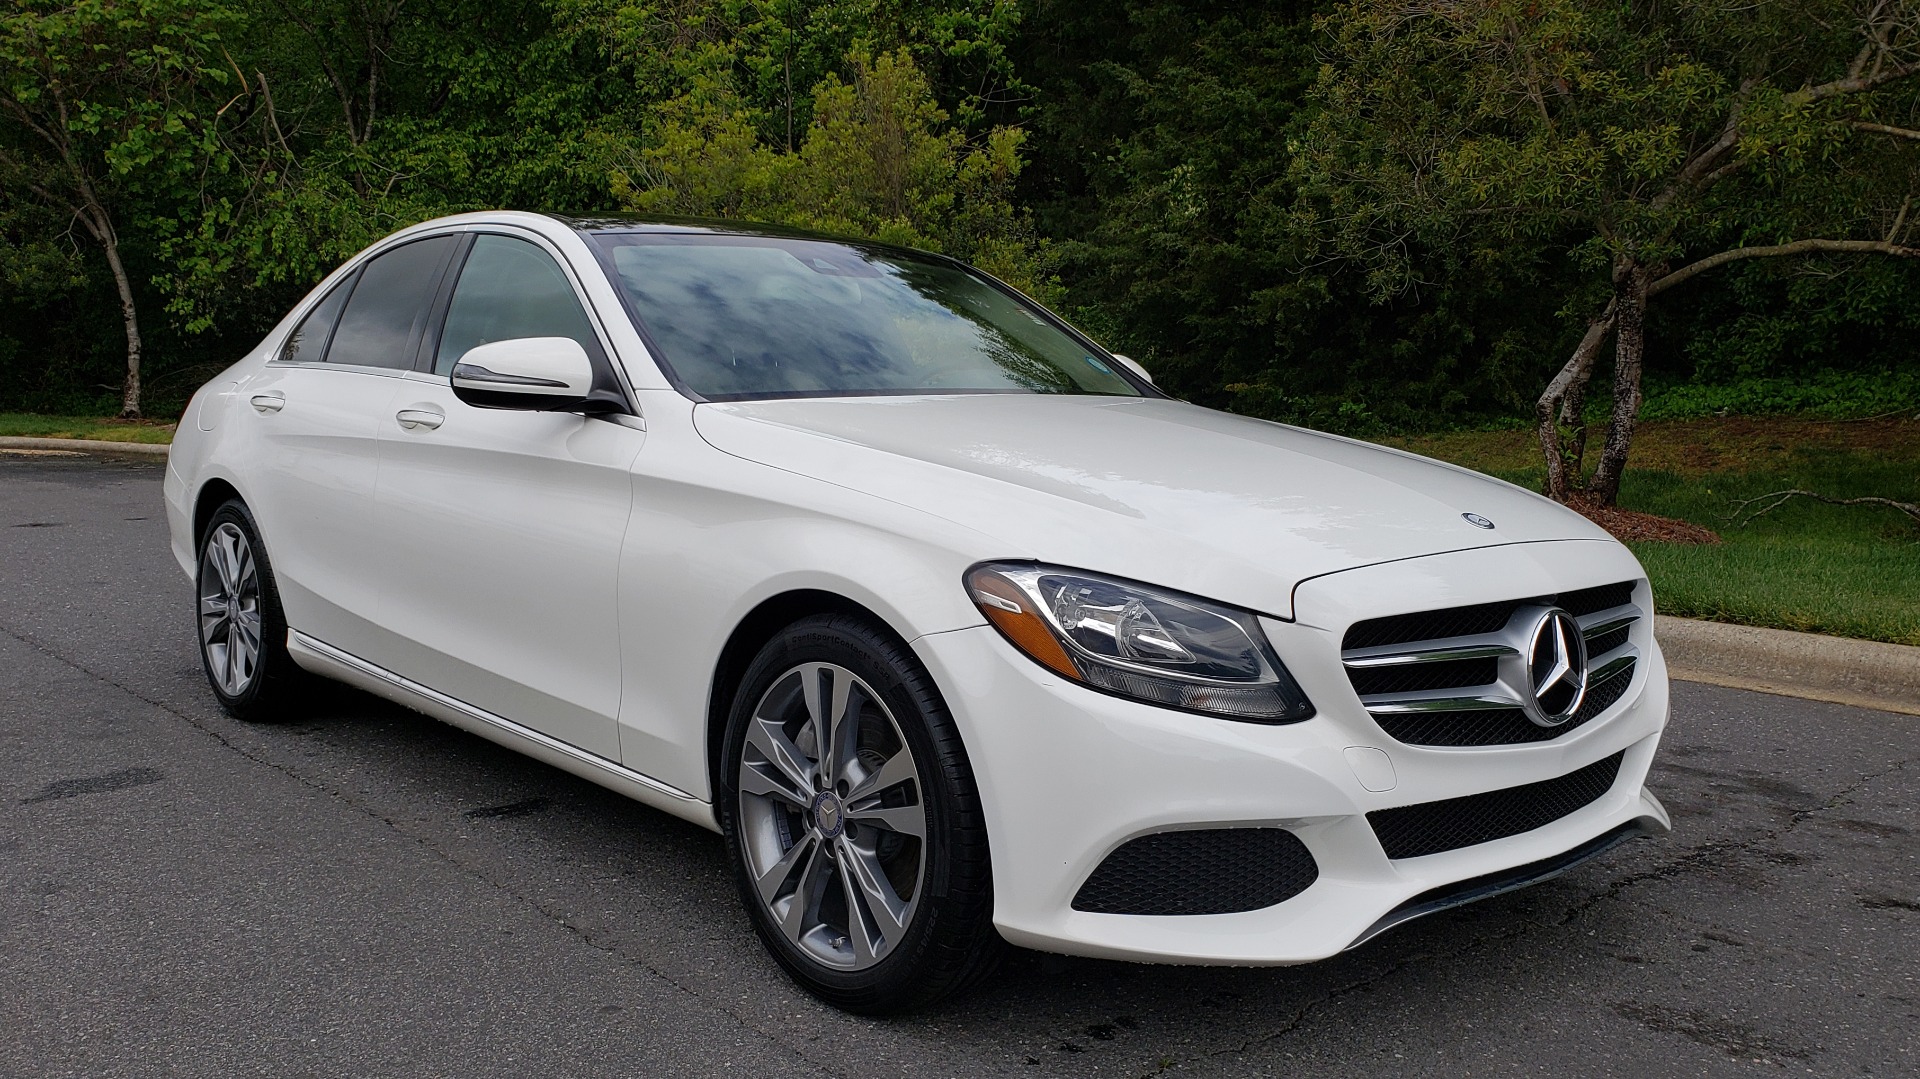 Used 2017 Mercedes-Benz C-Class C 300 PREMIUM / NAV / PANO-ROOF / HTD STS / REARVIEW for sale Sold at Formula Imports in Charlotte NC 28227 4